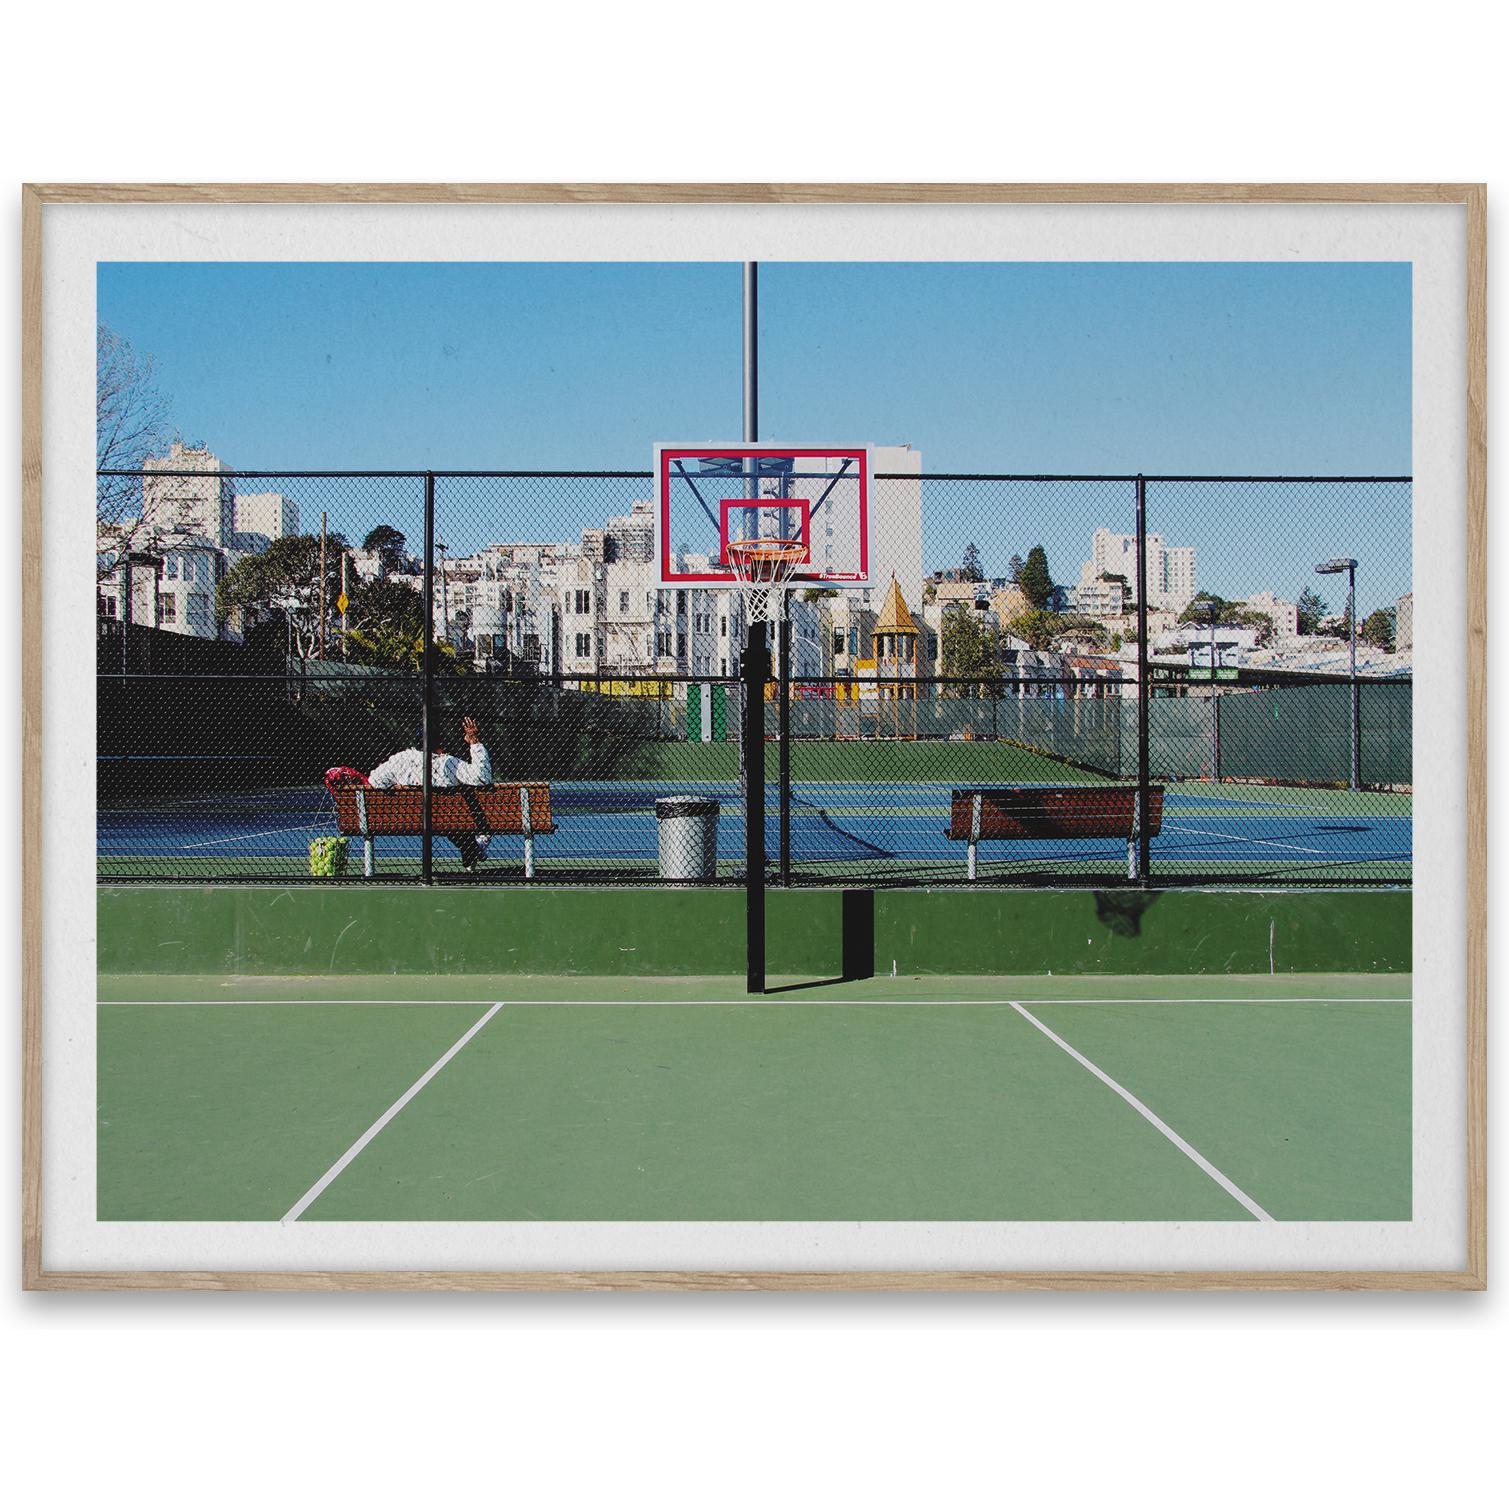 Paper Collective Cities of Basketball 09, San Francisco plakát, 30x40 cm